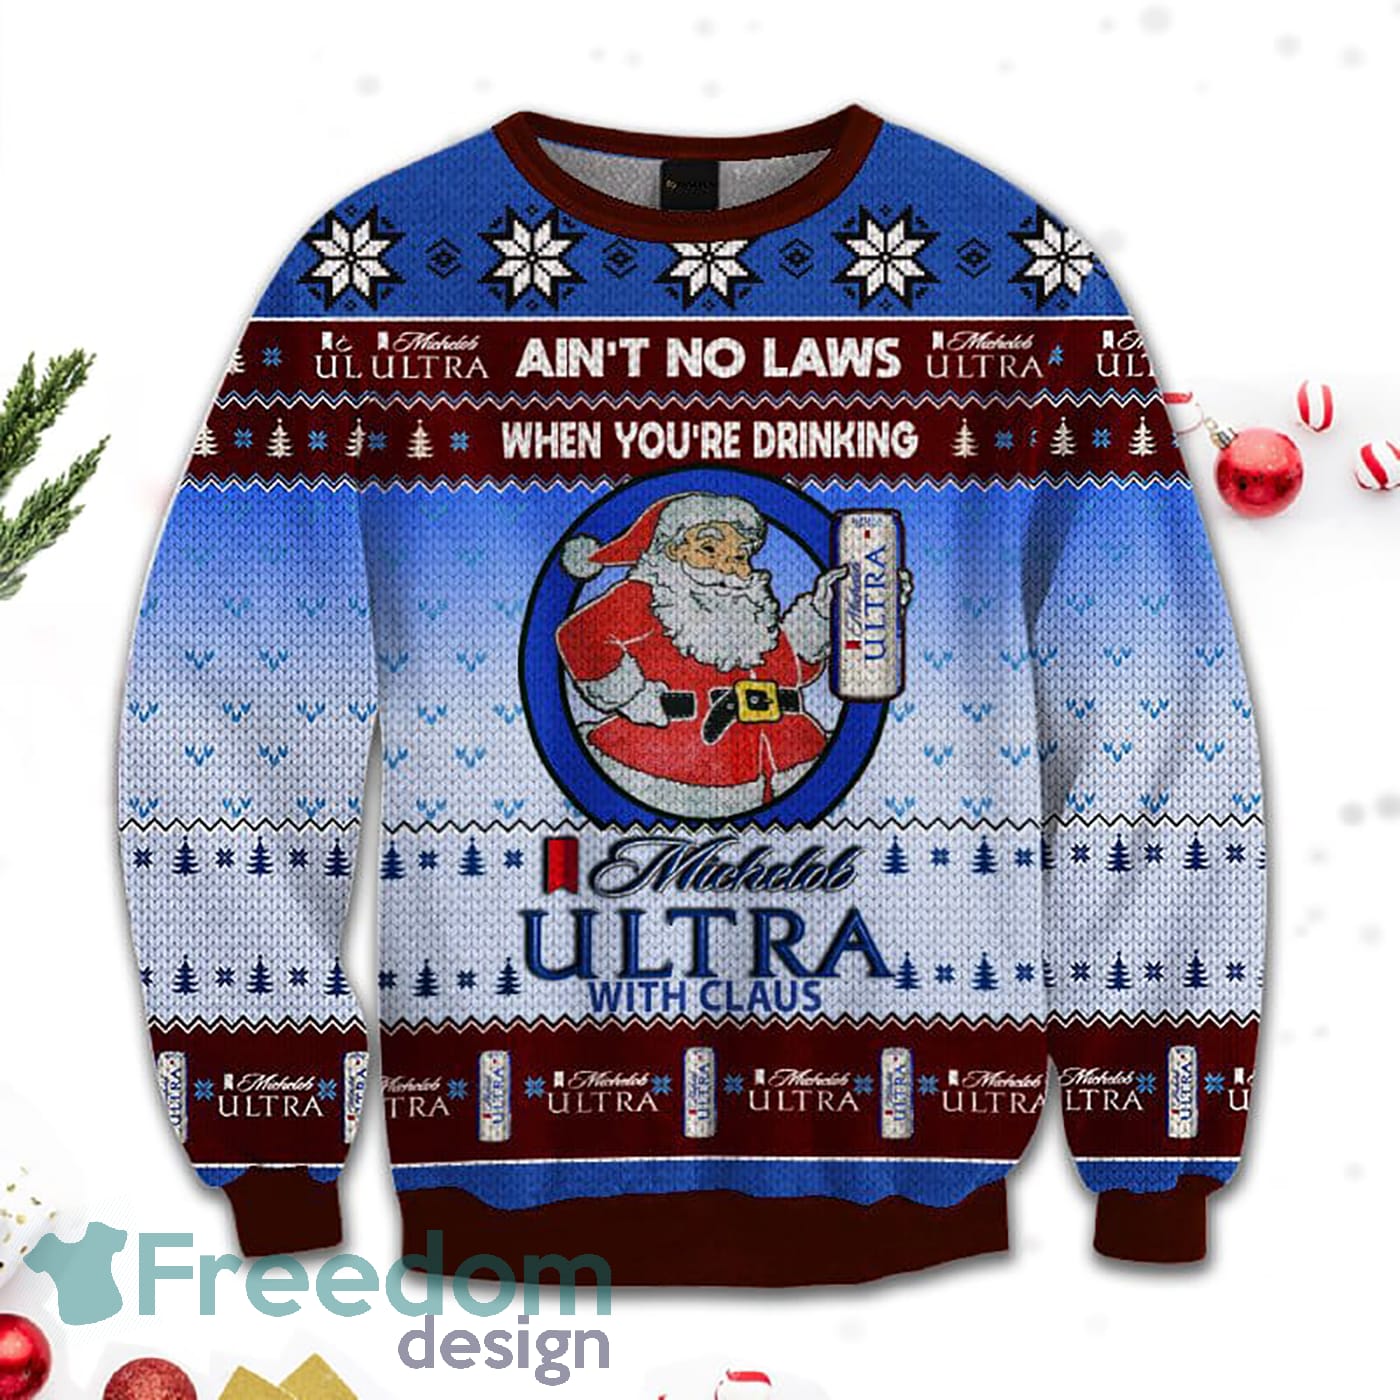 Merr Christmas Ain't No Laws When You Drink Michelob Ultra With Claus Sweatshirt